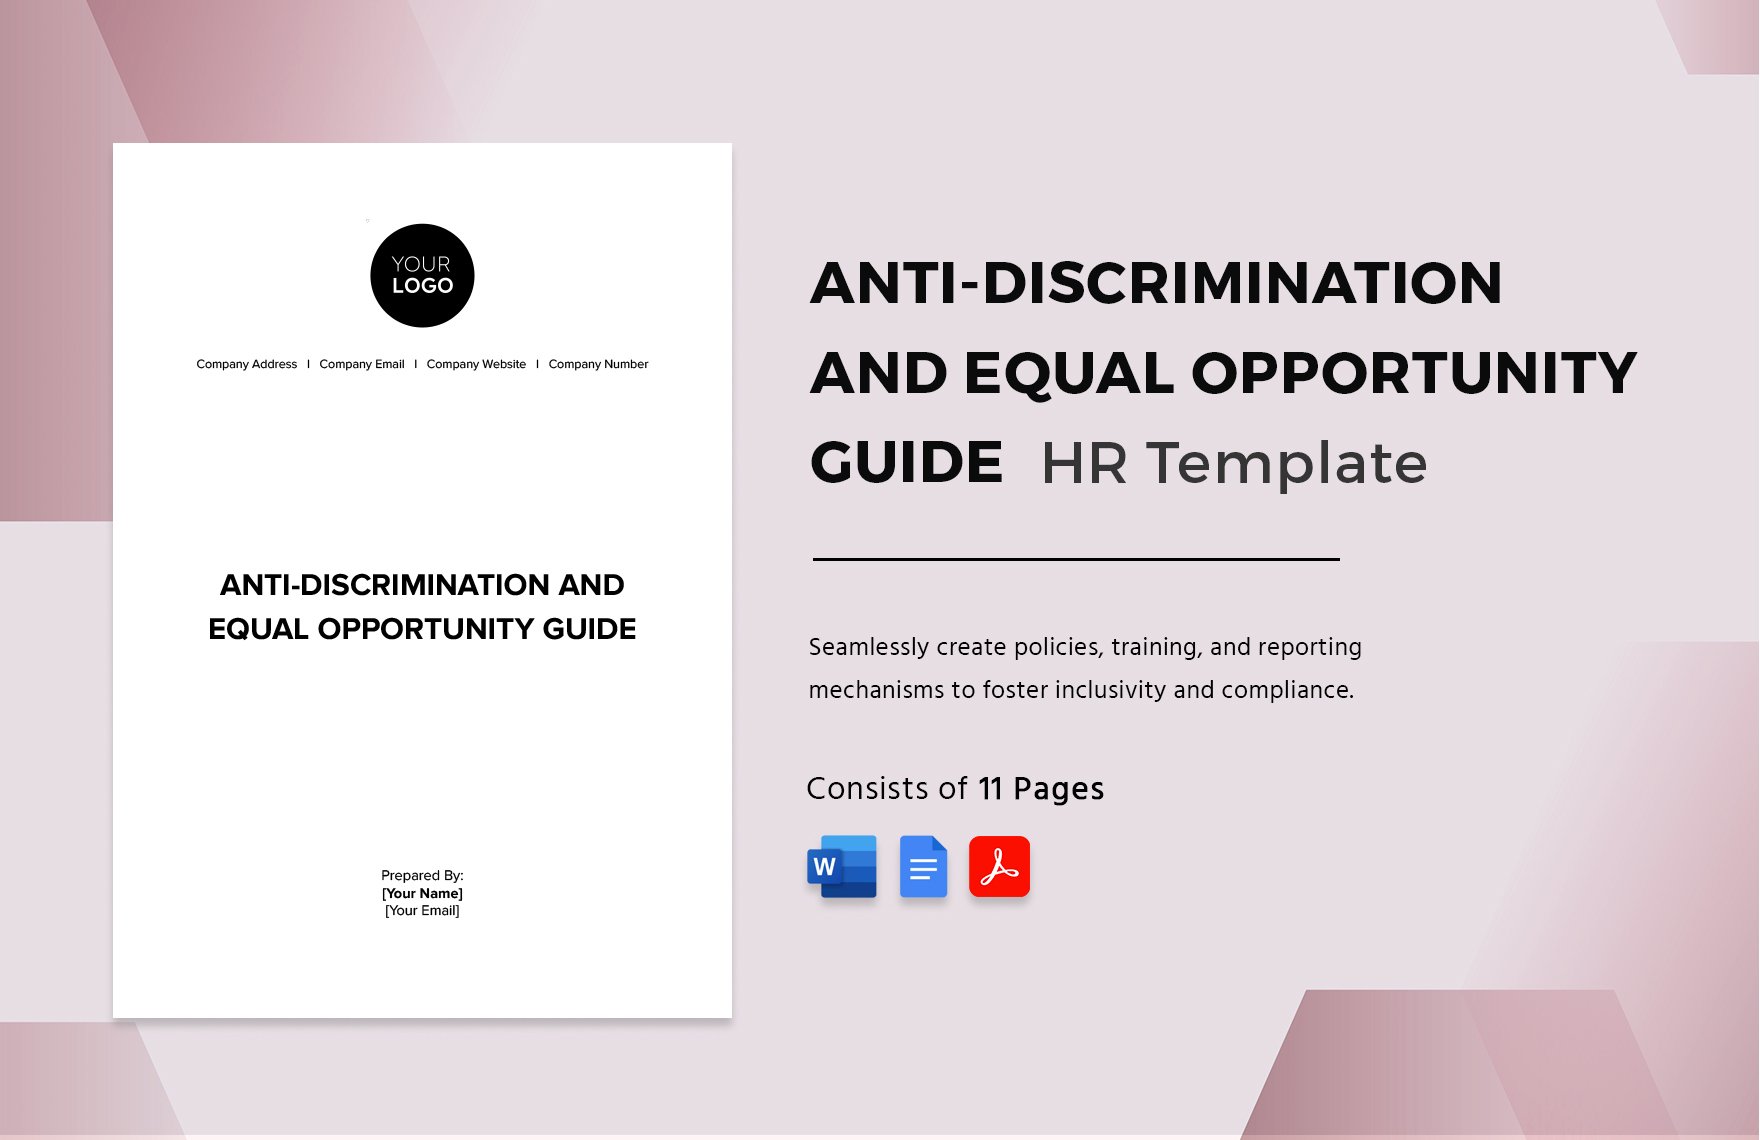 Anti-discrimination and Equal Opportunity Guide HR Template